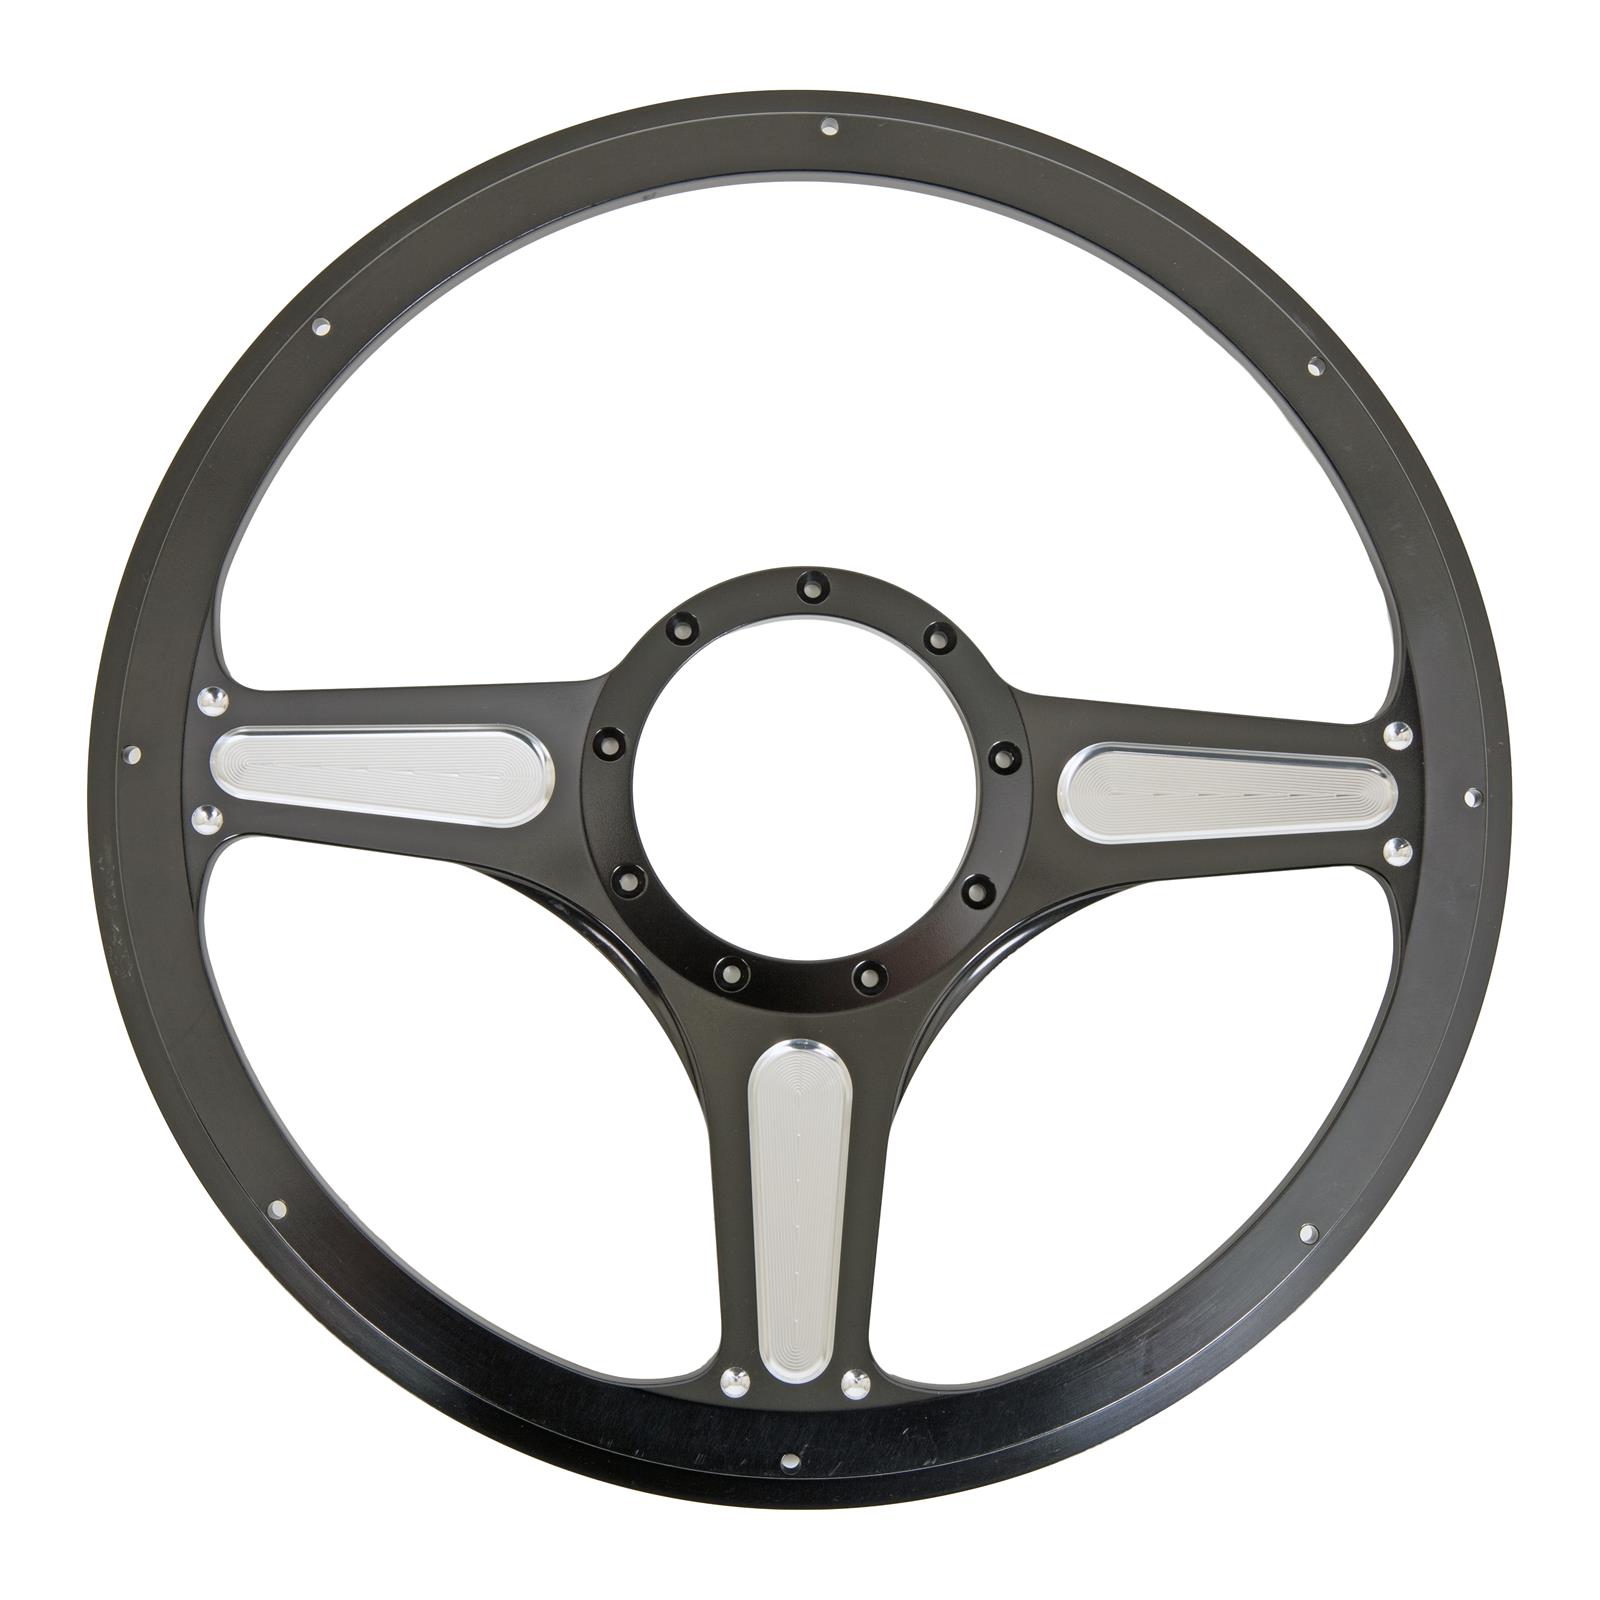 Black Steering Wheel 14" Billet Muscle Style Wheel with Chevy Bowtie Horn Button